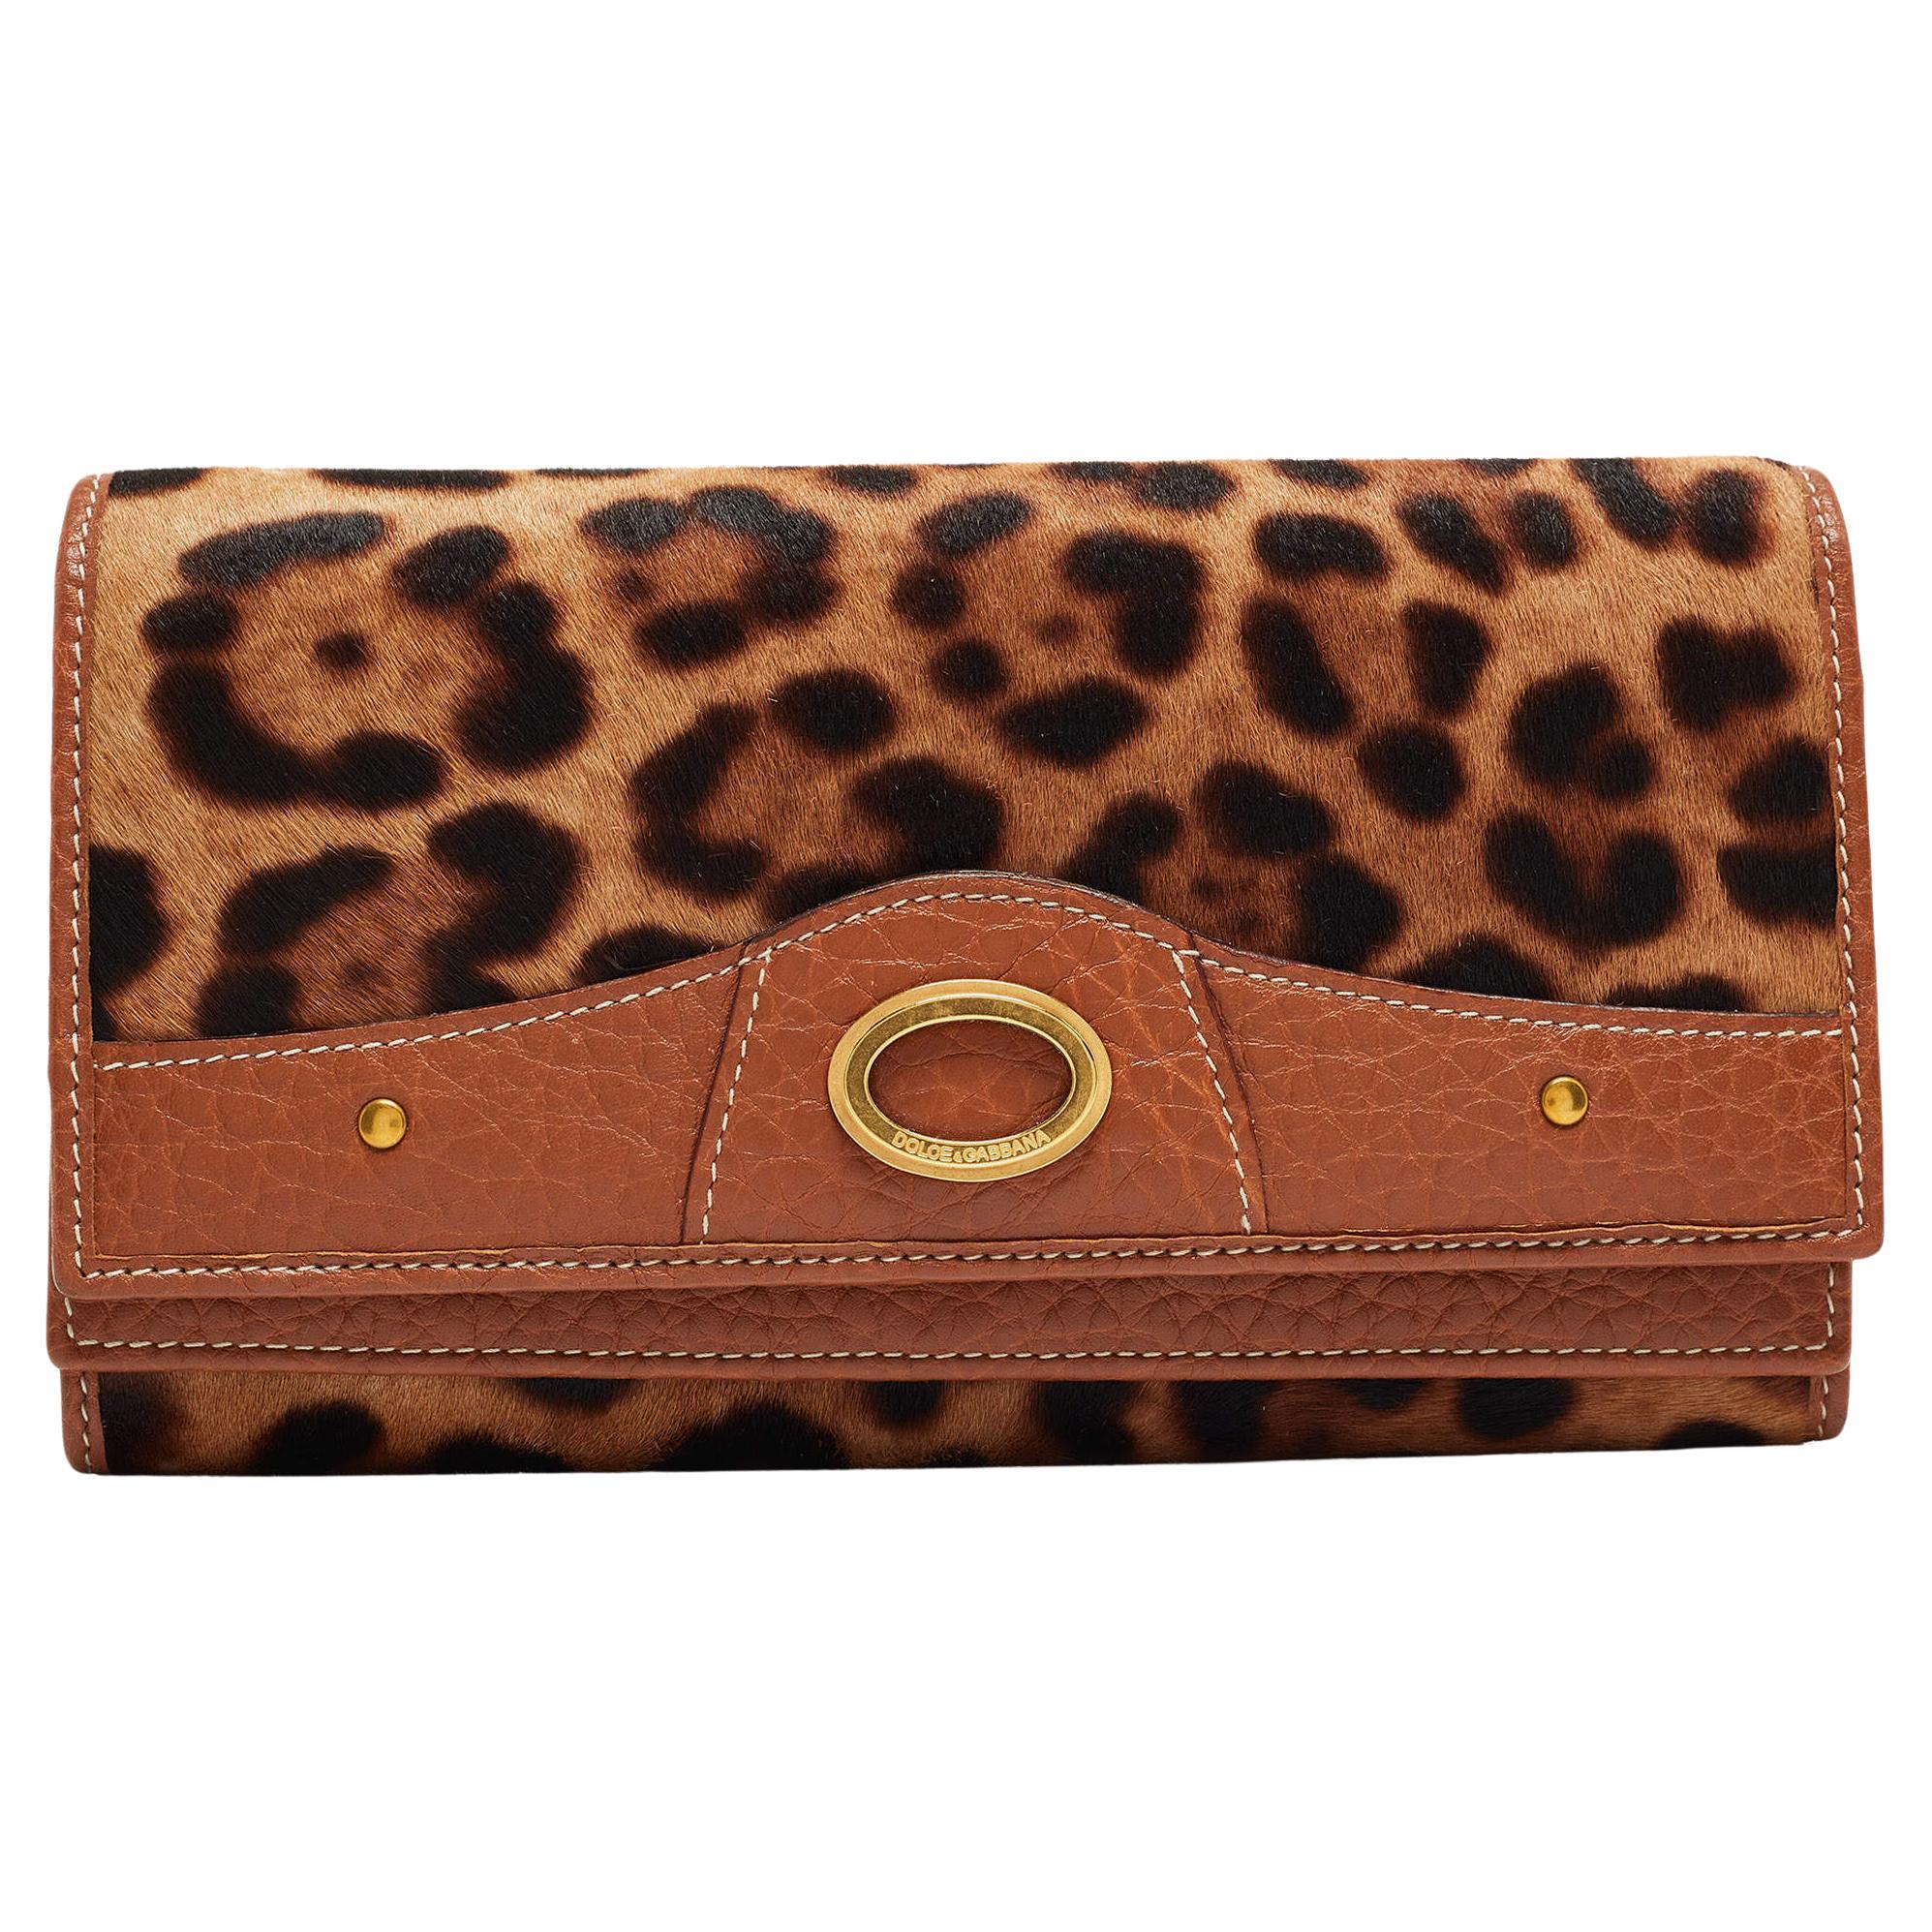 Dolce & Gabbana Brown/Beige Leopard Print Calfhair Double Continental Wallet For Sale